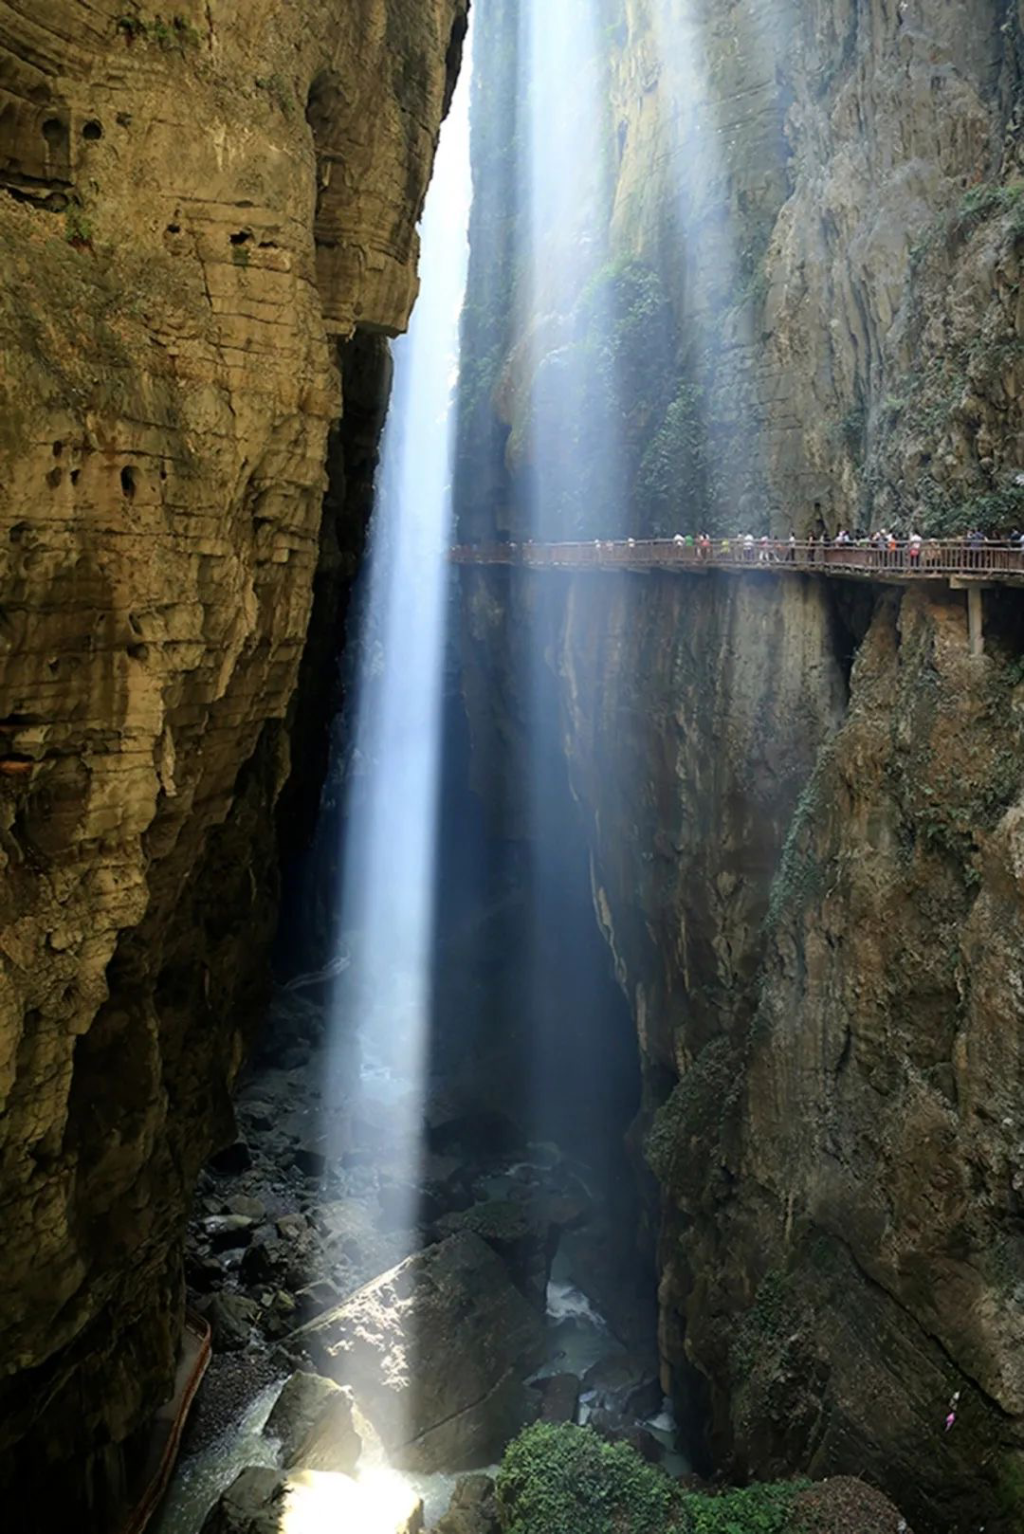 Wuling Great Rift Valley. (Photo provided by the Chongqing Municipal Culture and Tourism Commission)